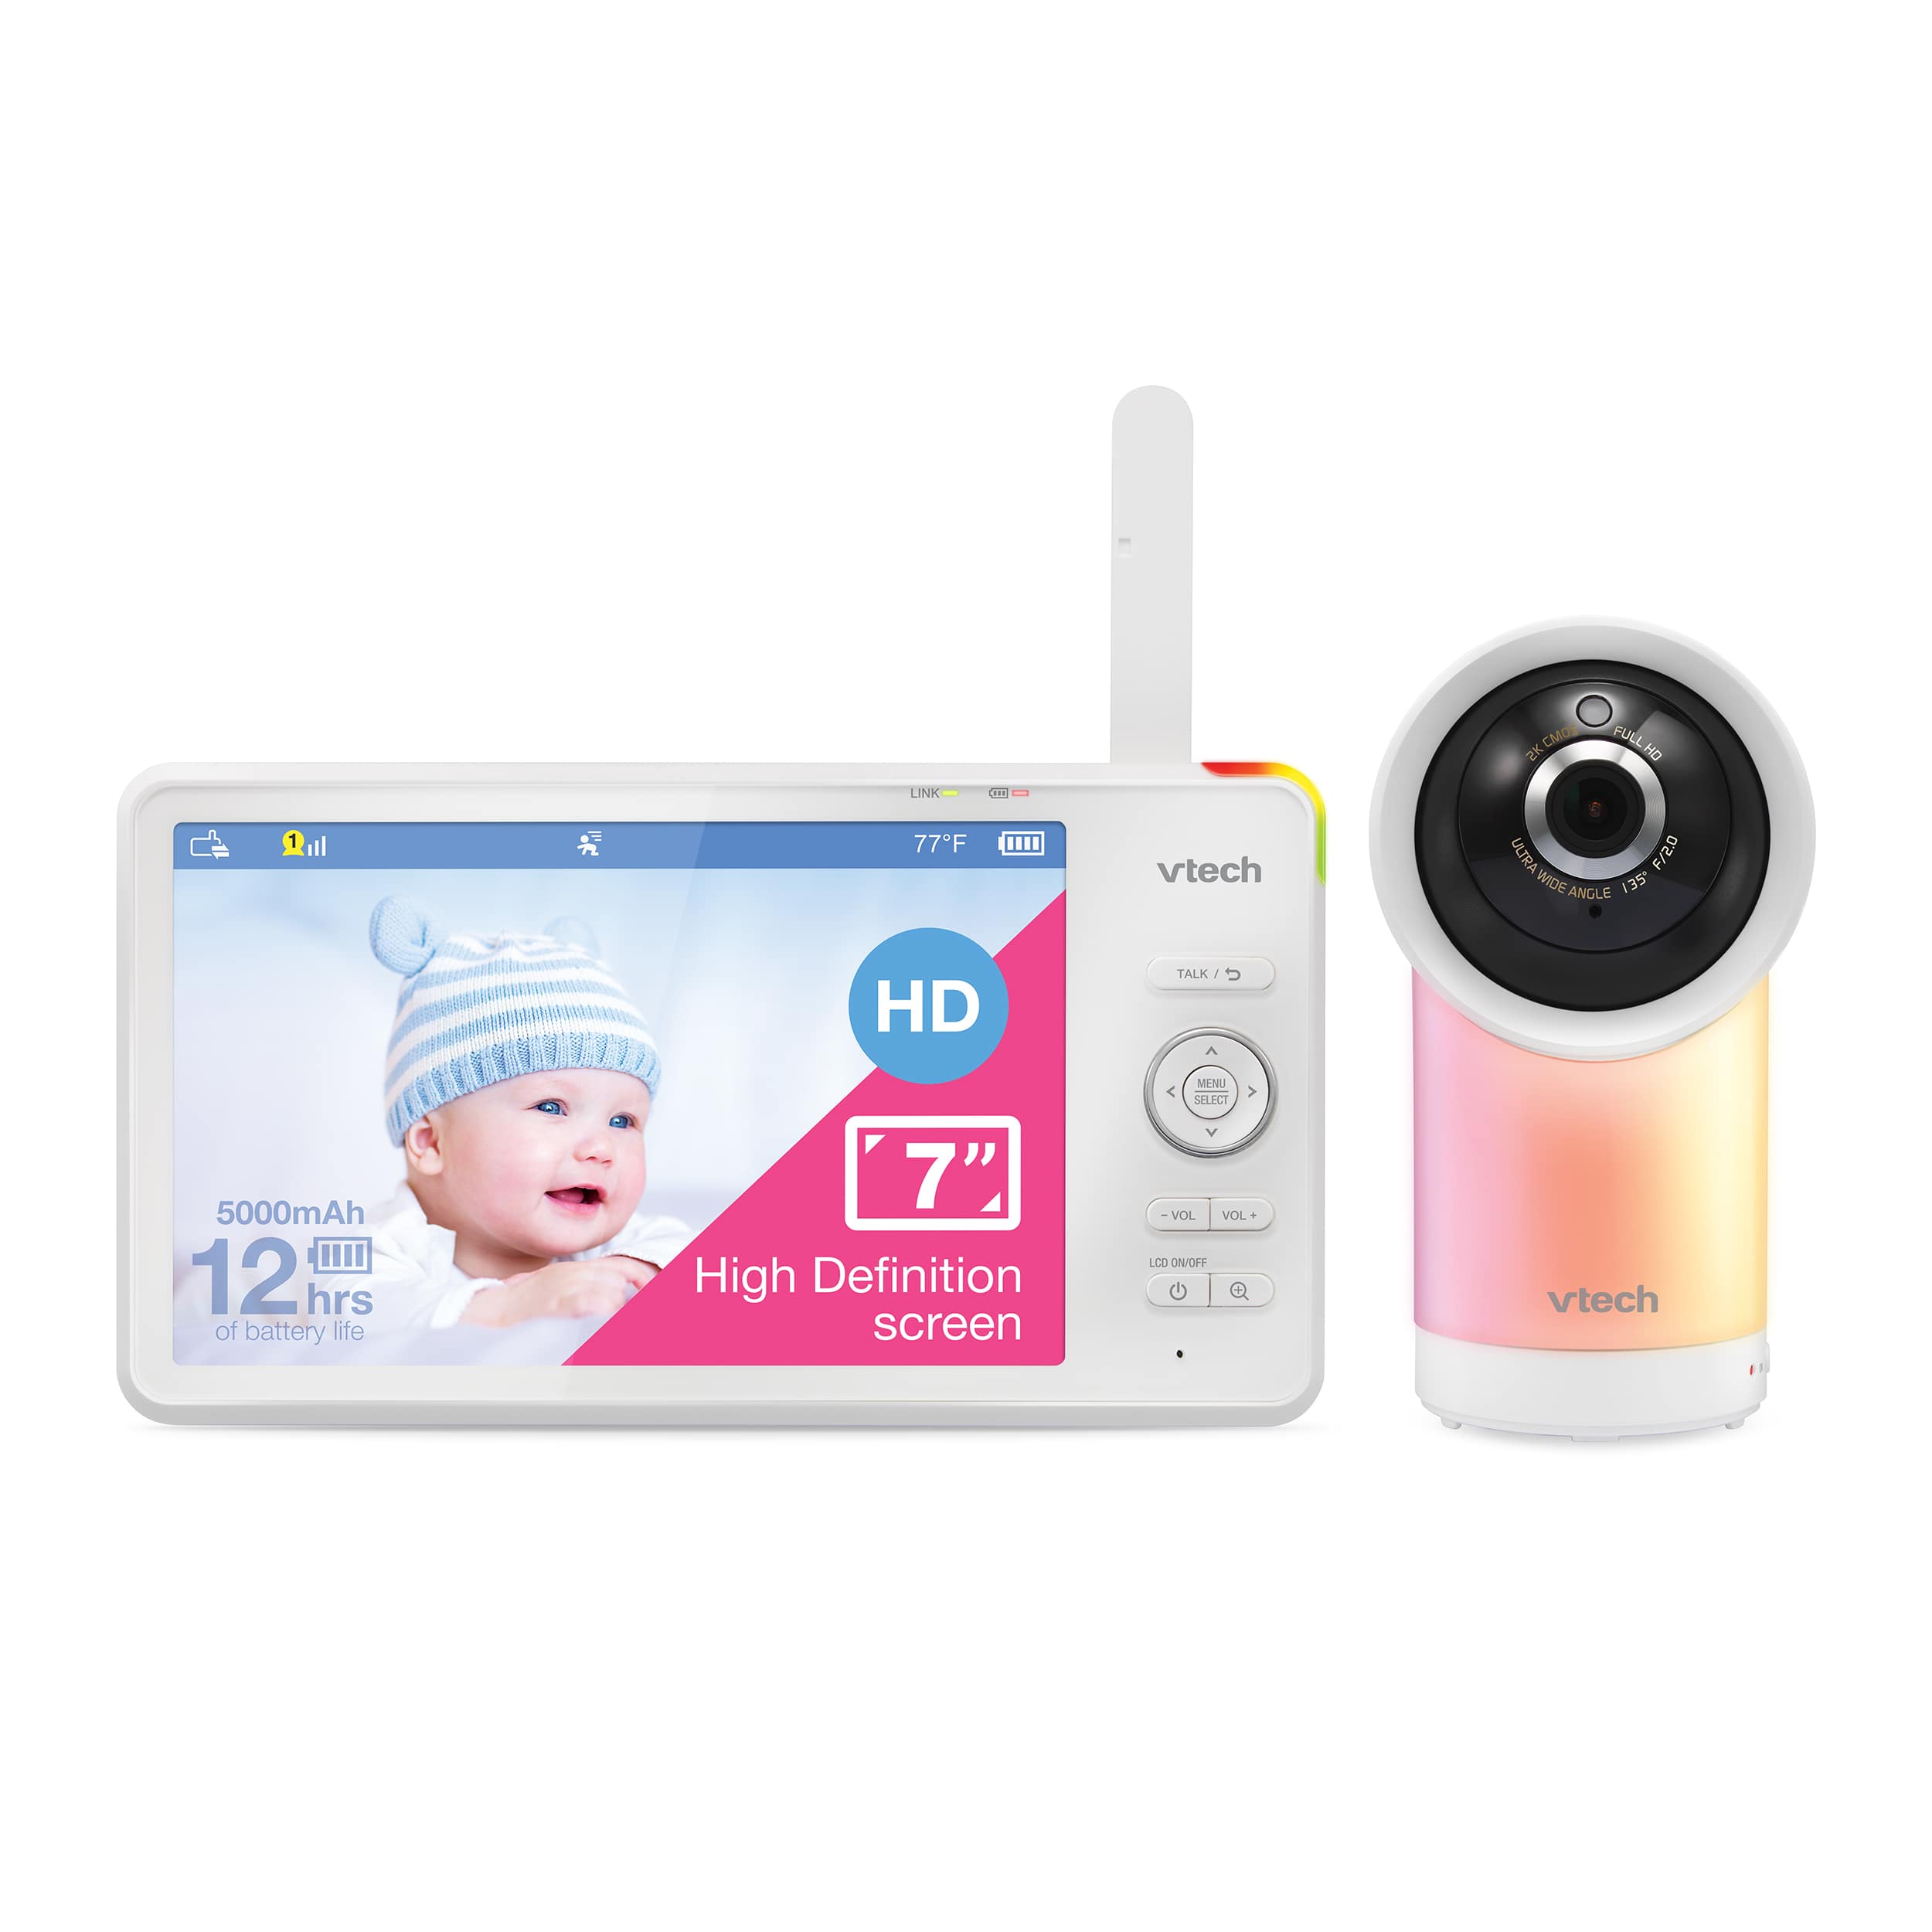 1080p Smart WiFi Remote Access 360 Degree Pan & Tilt Video Baby Monitor with 7" High Definition 720p Display, Night Light